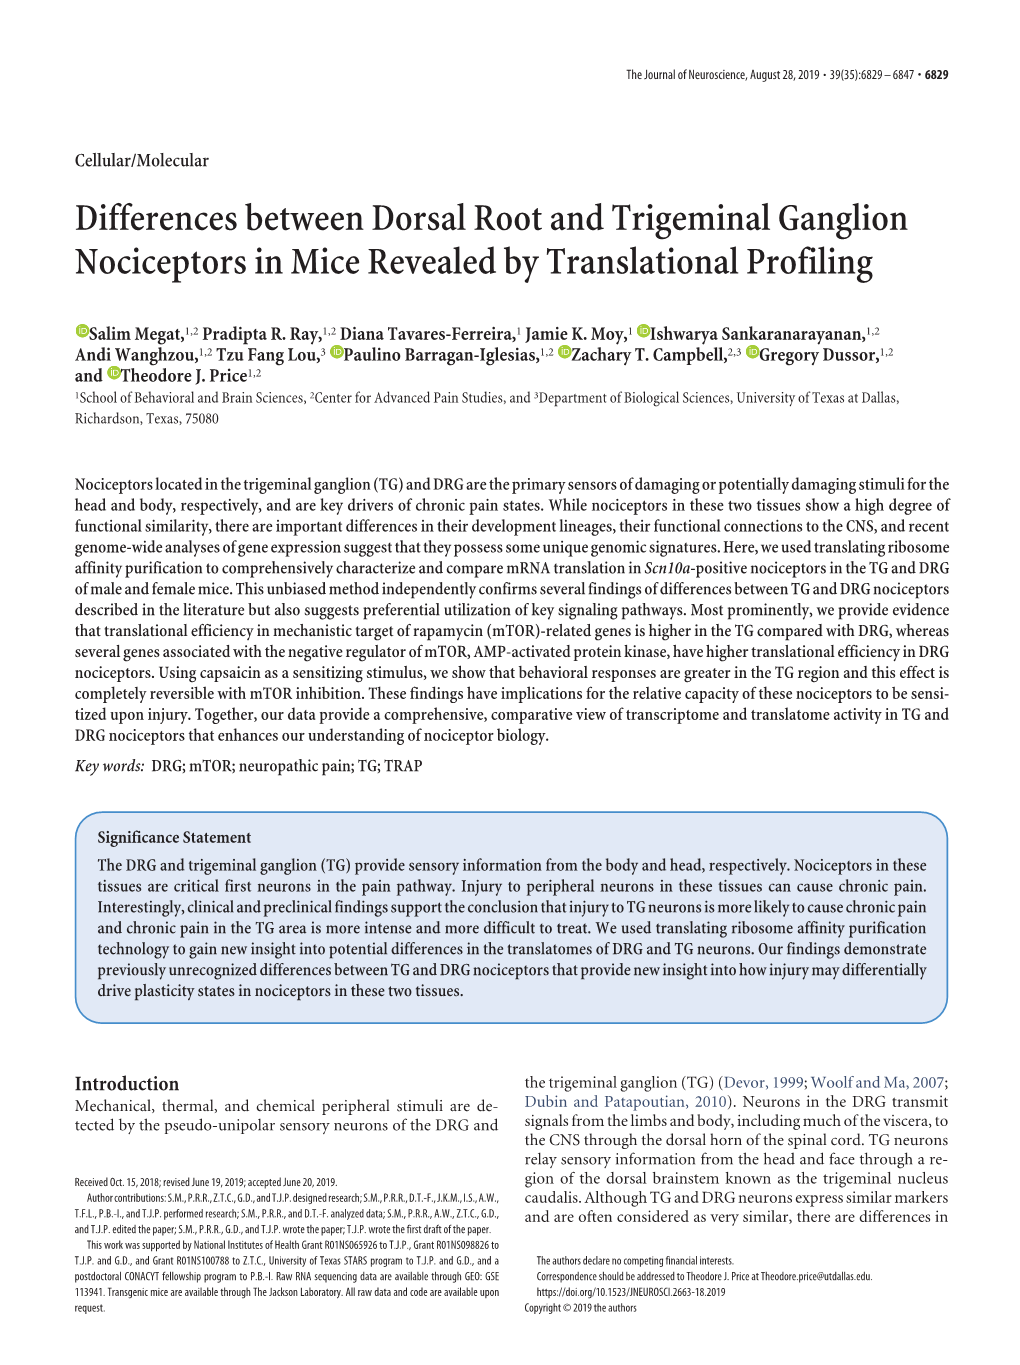 Differences Between Dorsal Root and Trigeminal Ganglion Nociceptors in Mice Revealed by Translational Profiling